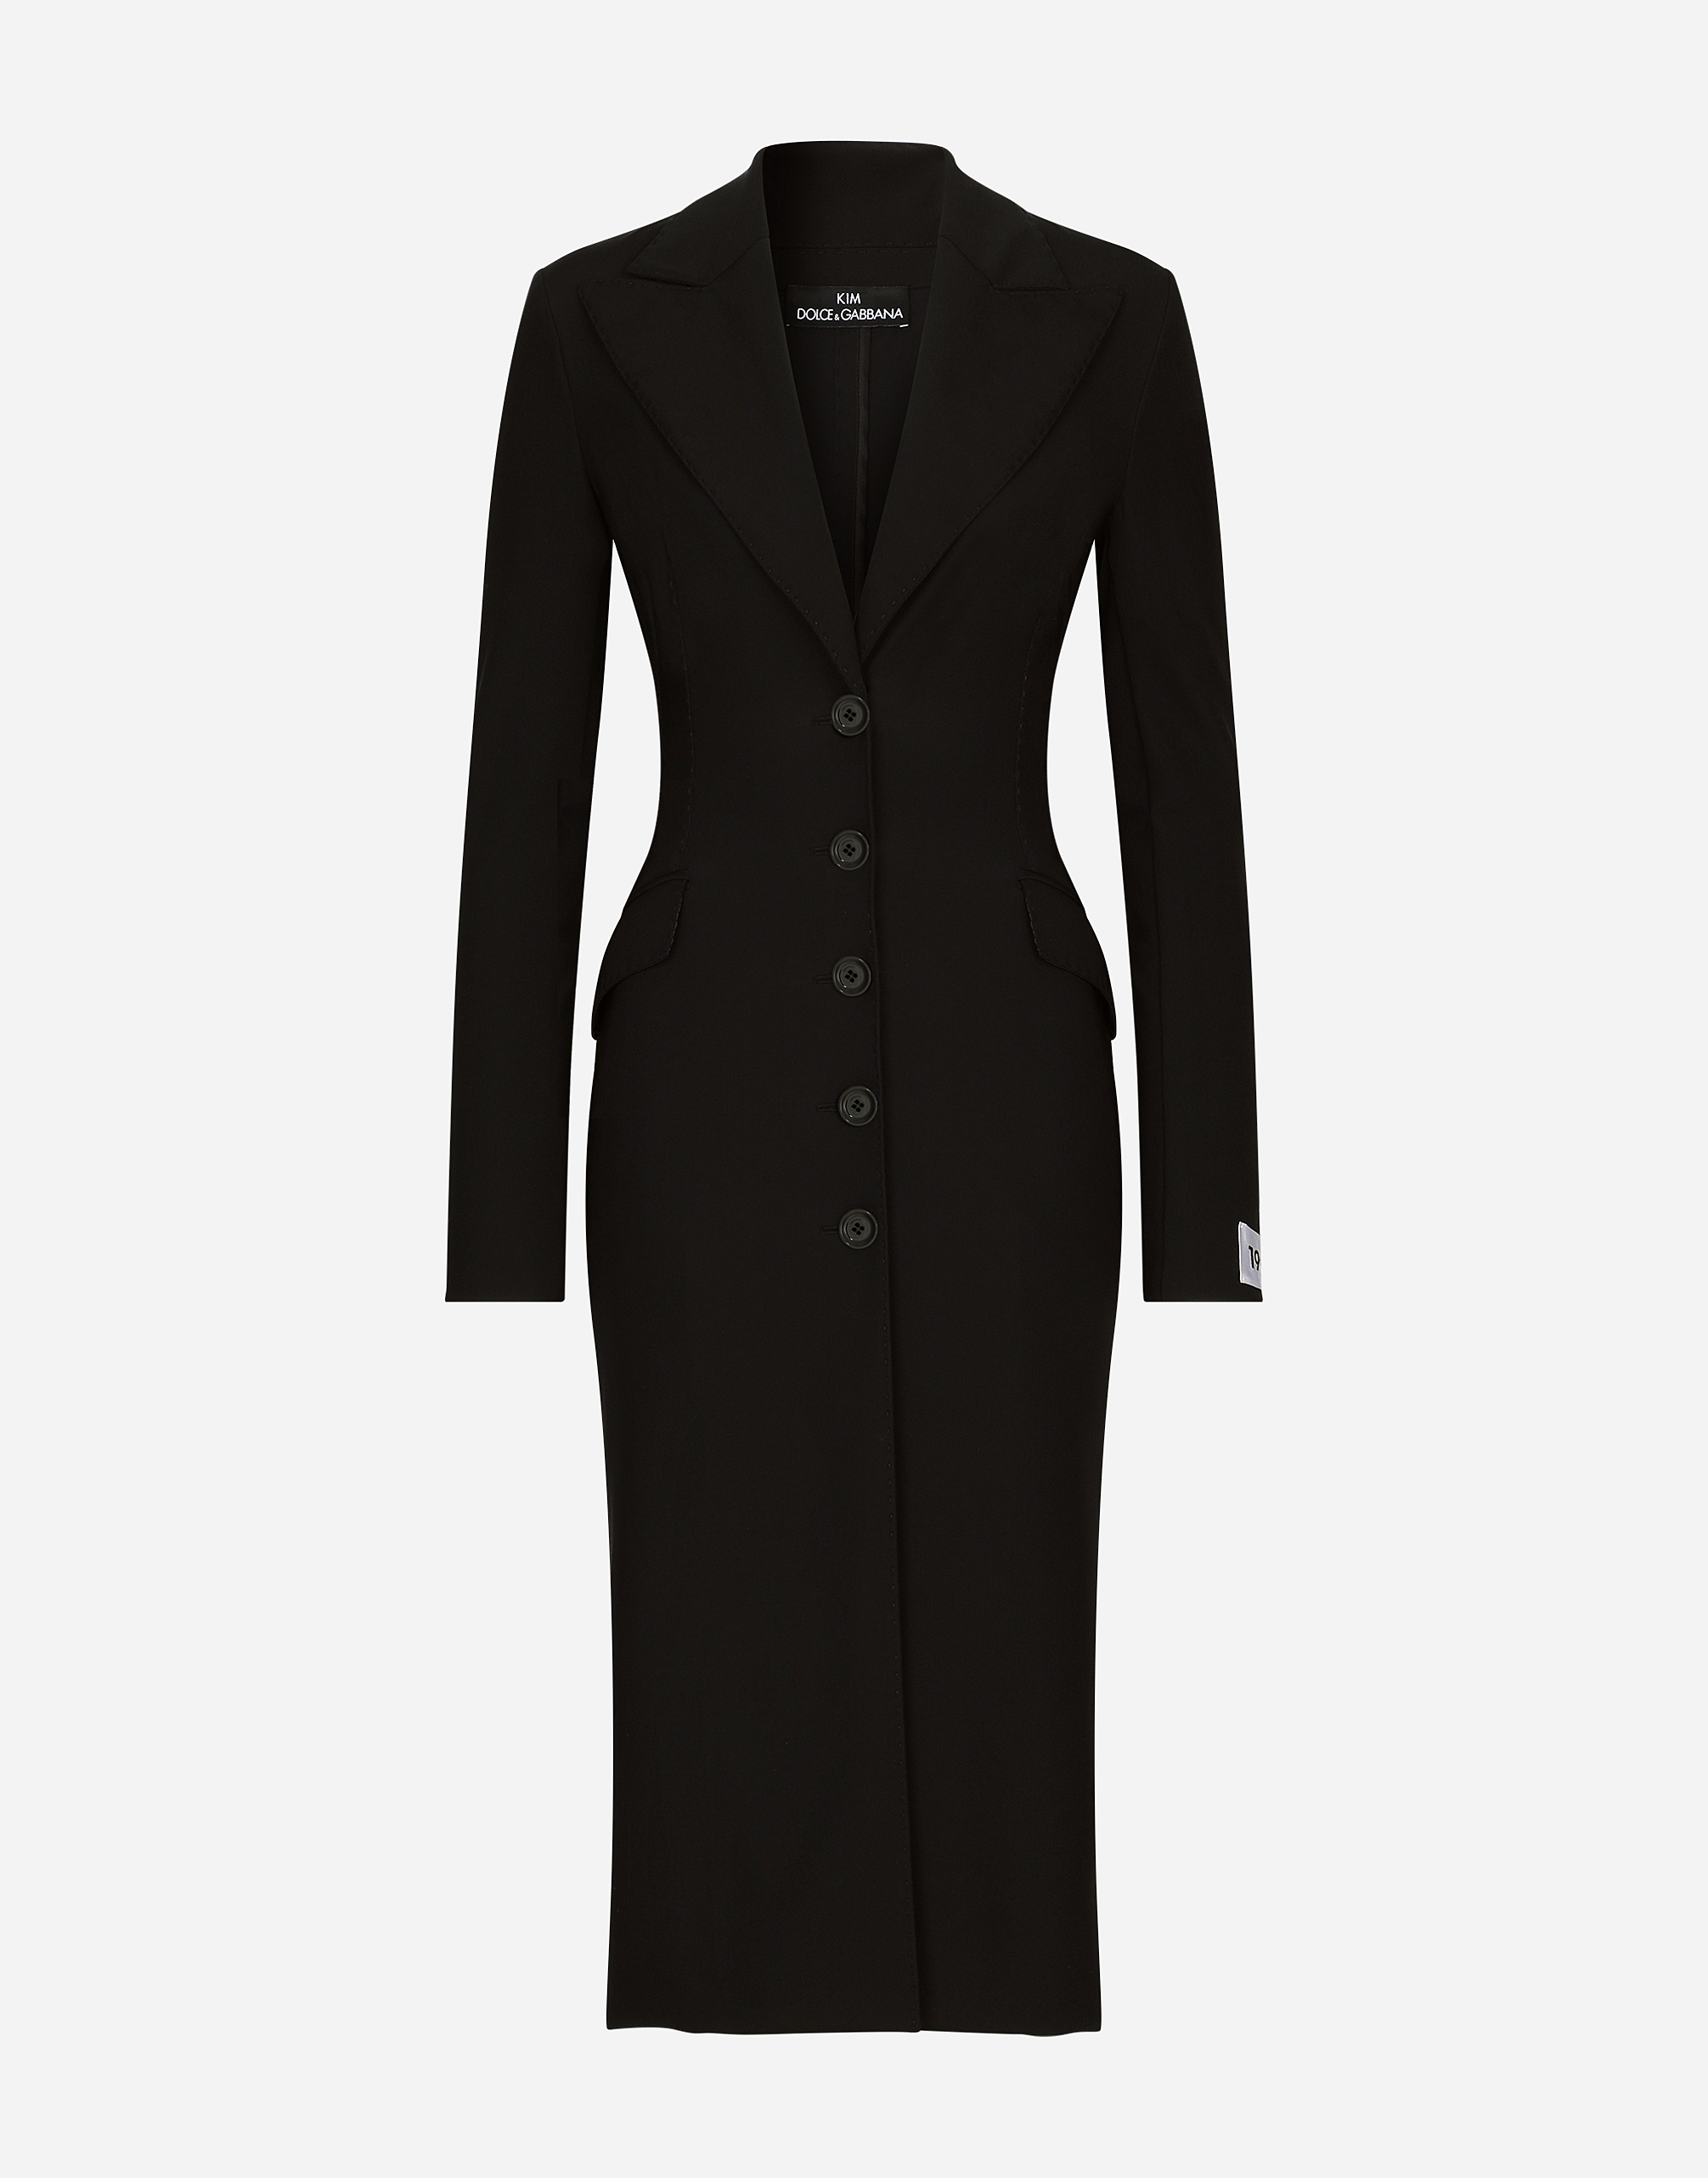 KIM DOLCE&GABBANA Jersey coat dress with the Re-Edition label in Black